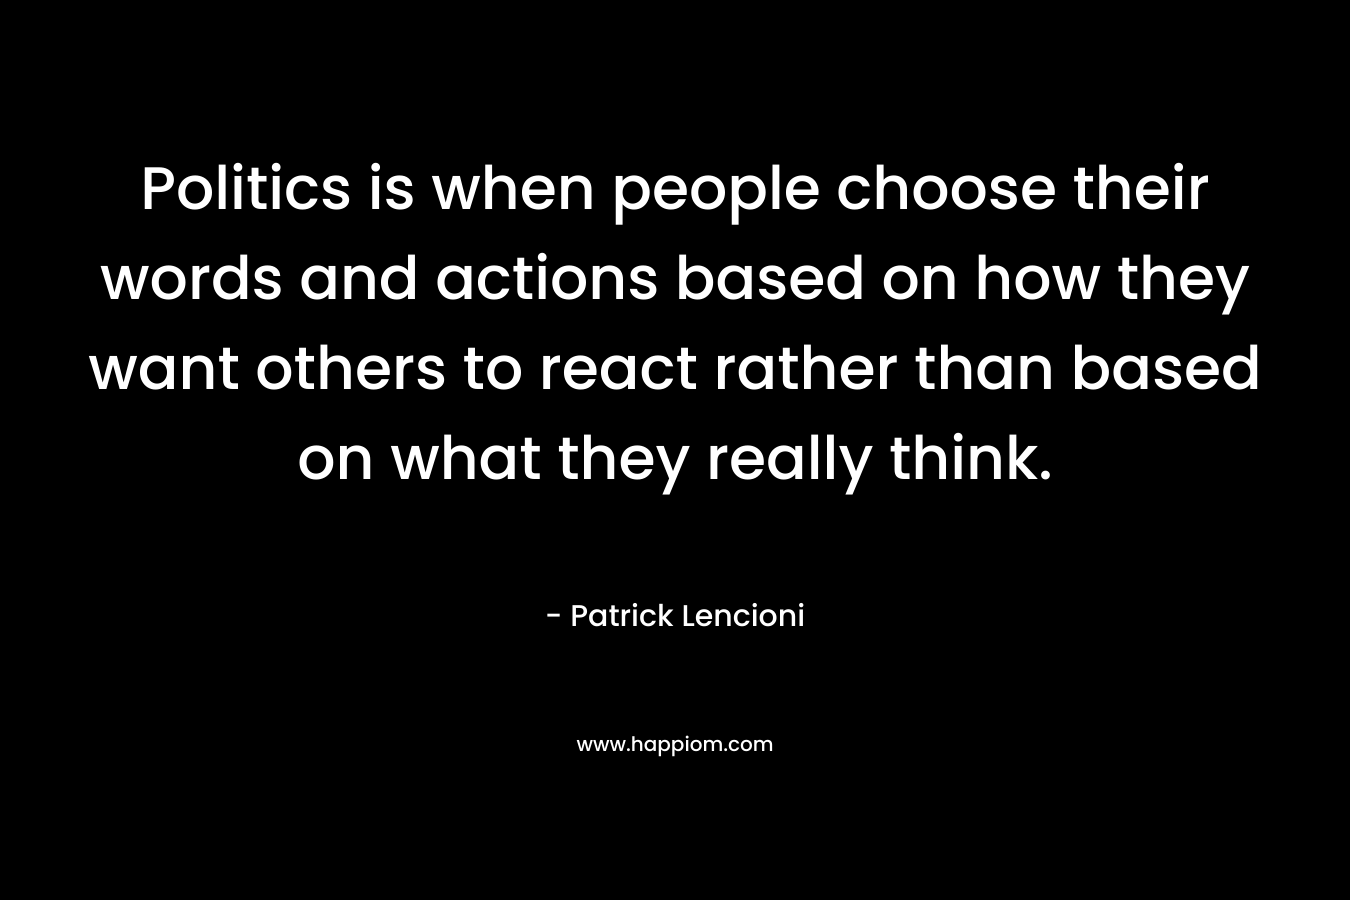 Politics is when people choose their words and actions based on how they want others to react rather than based on what they really think.